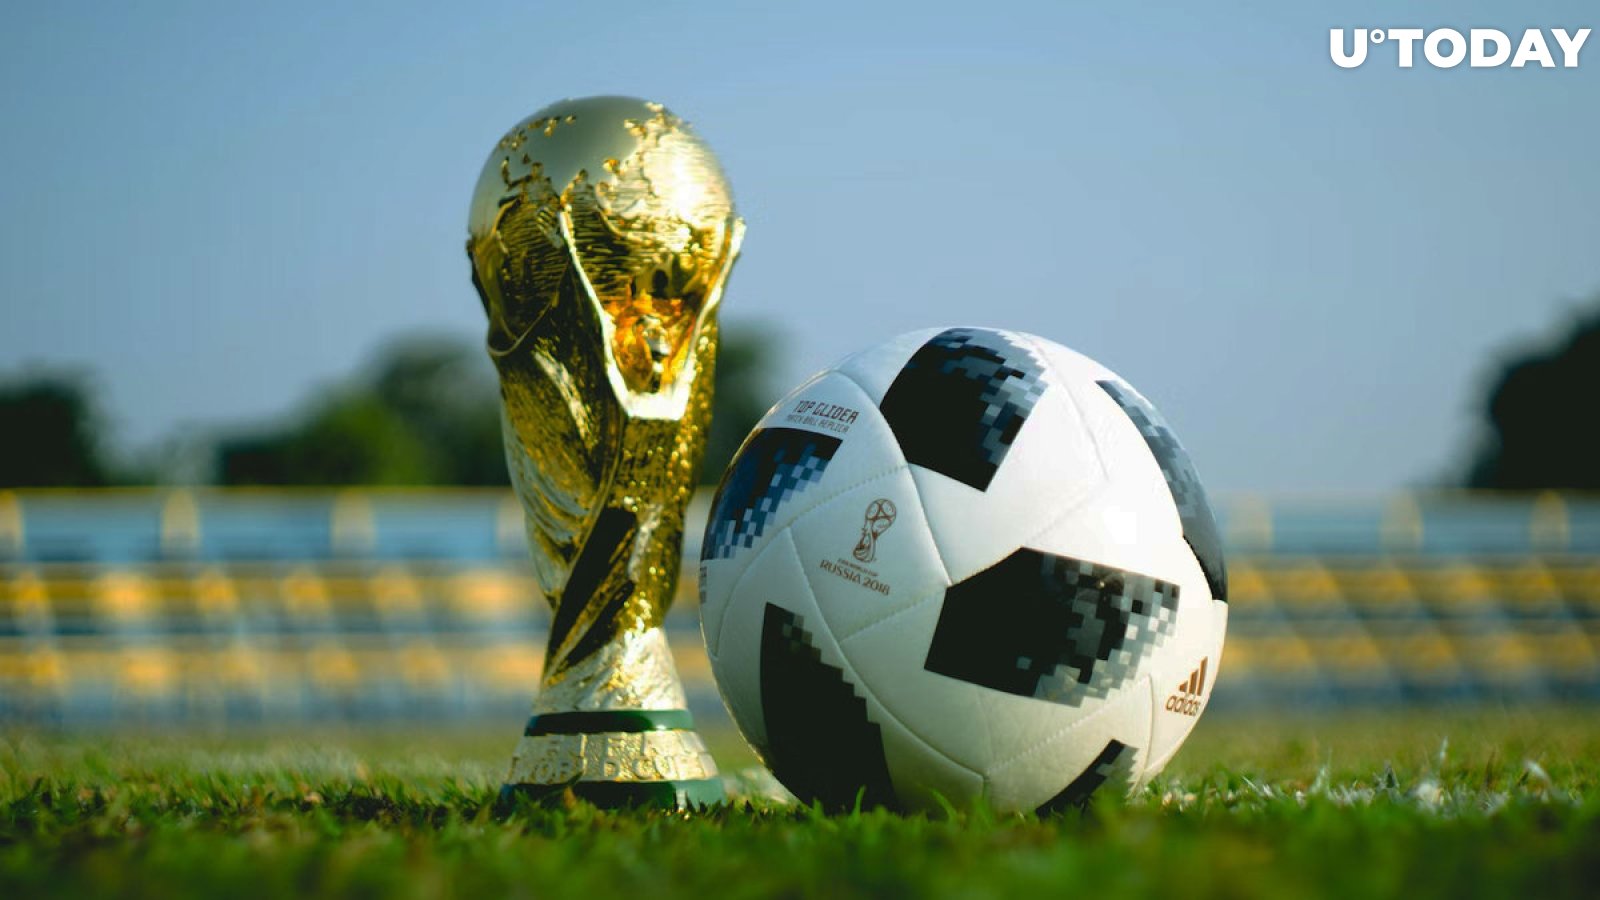 Soccer Tokens' Prices "Explode" 2 Days Prior to FIFA World Cup